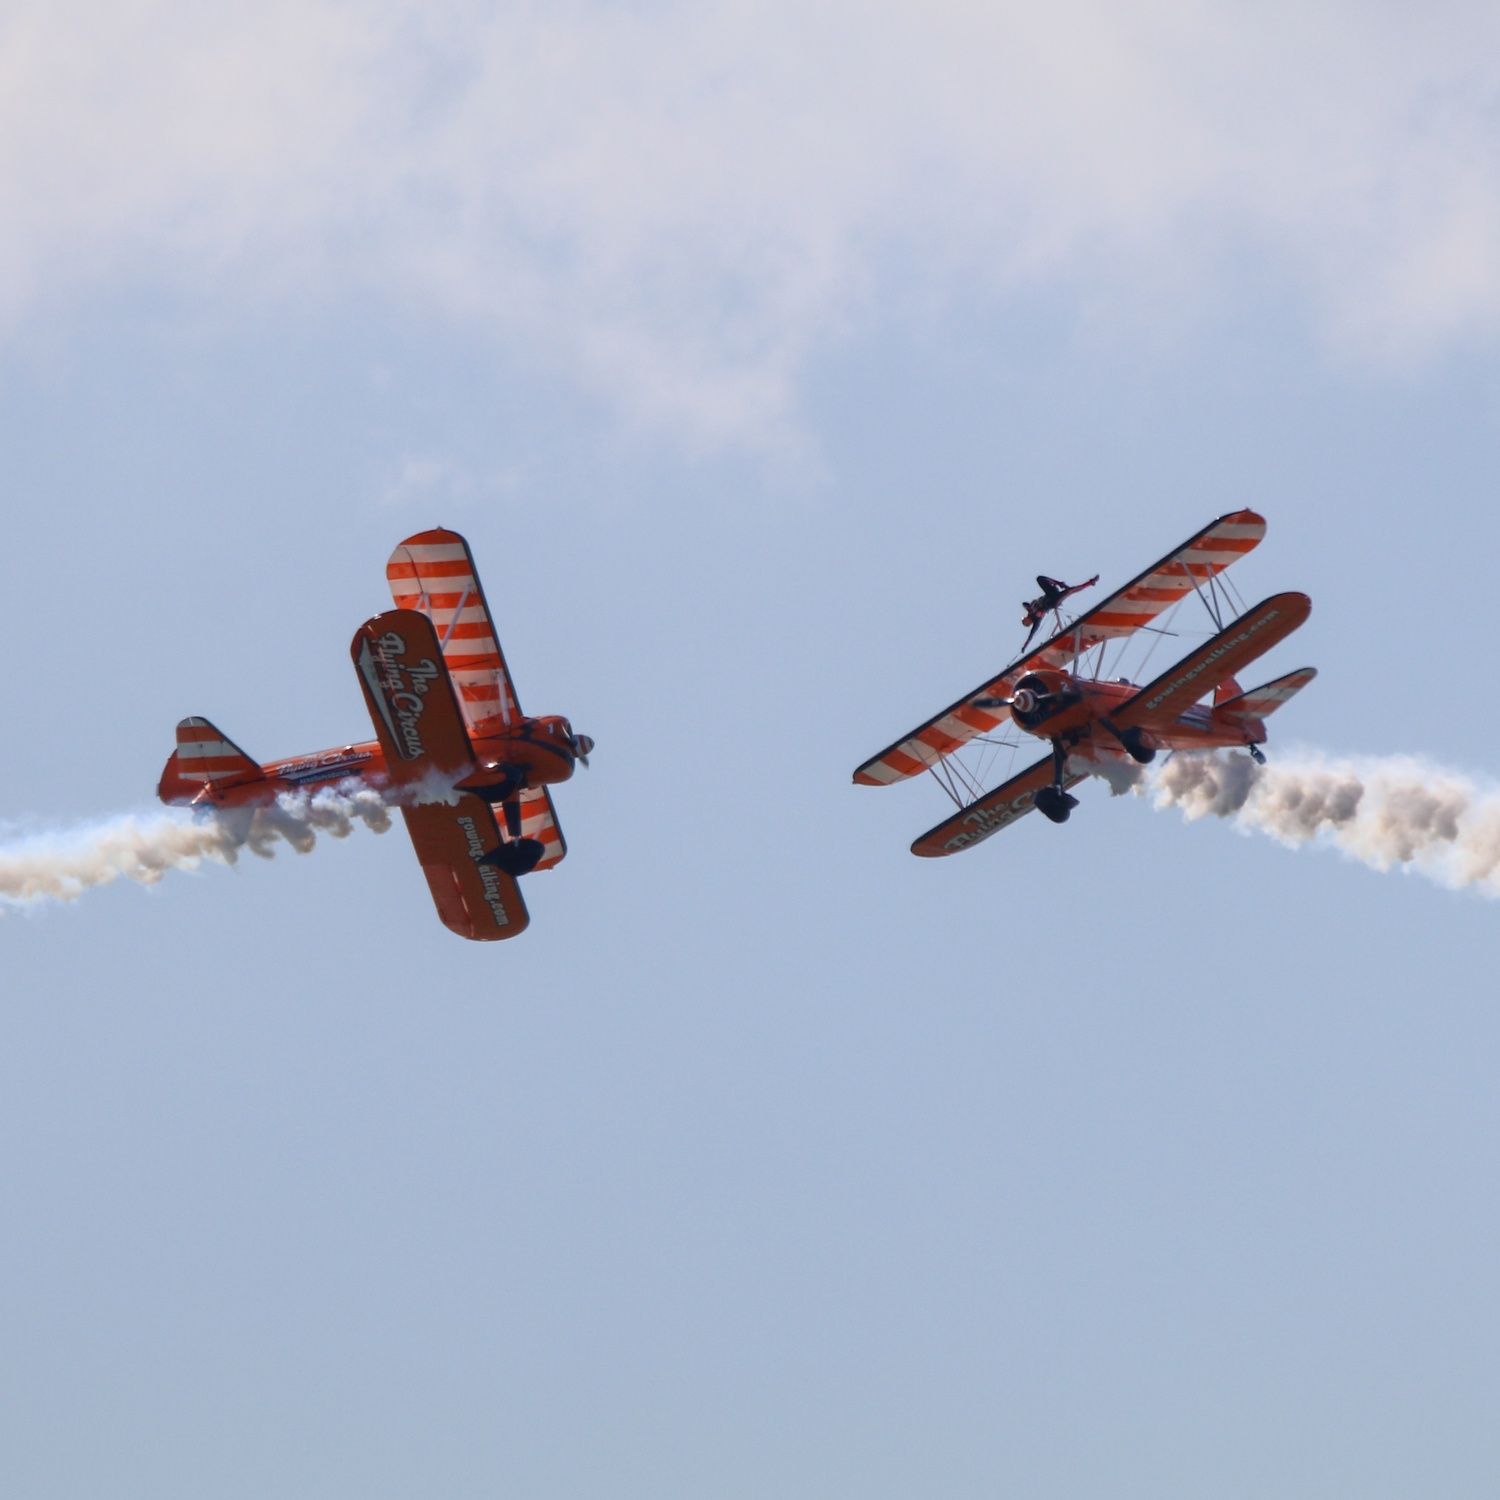 Wingwalkers performing an opposition pass against grey sky